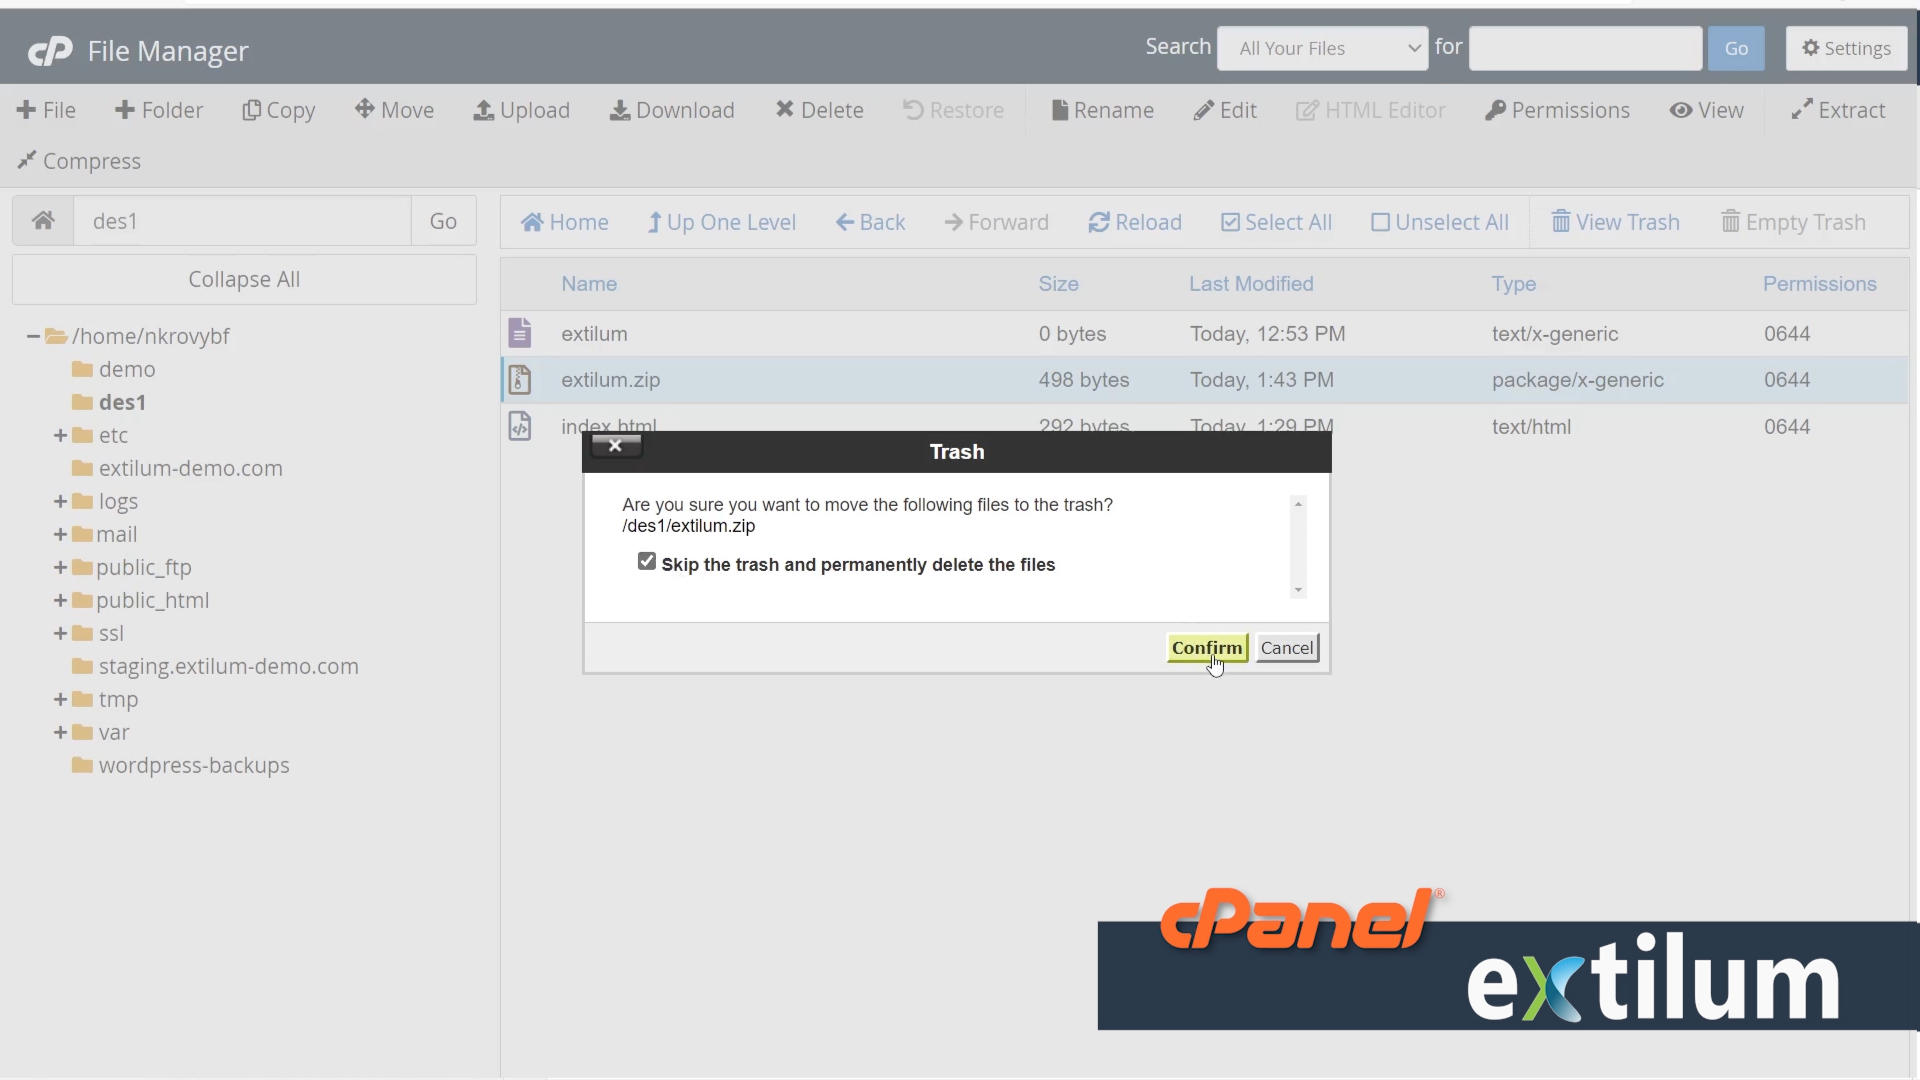 Extilum cPanel - File Manager - Extract files